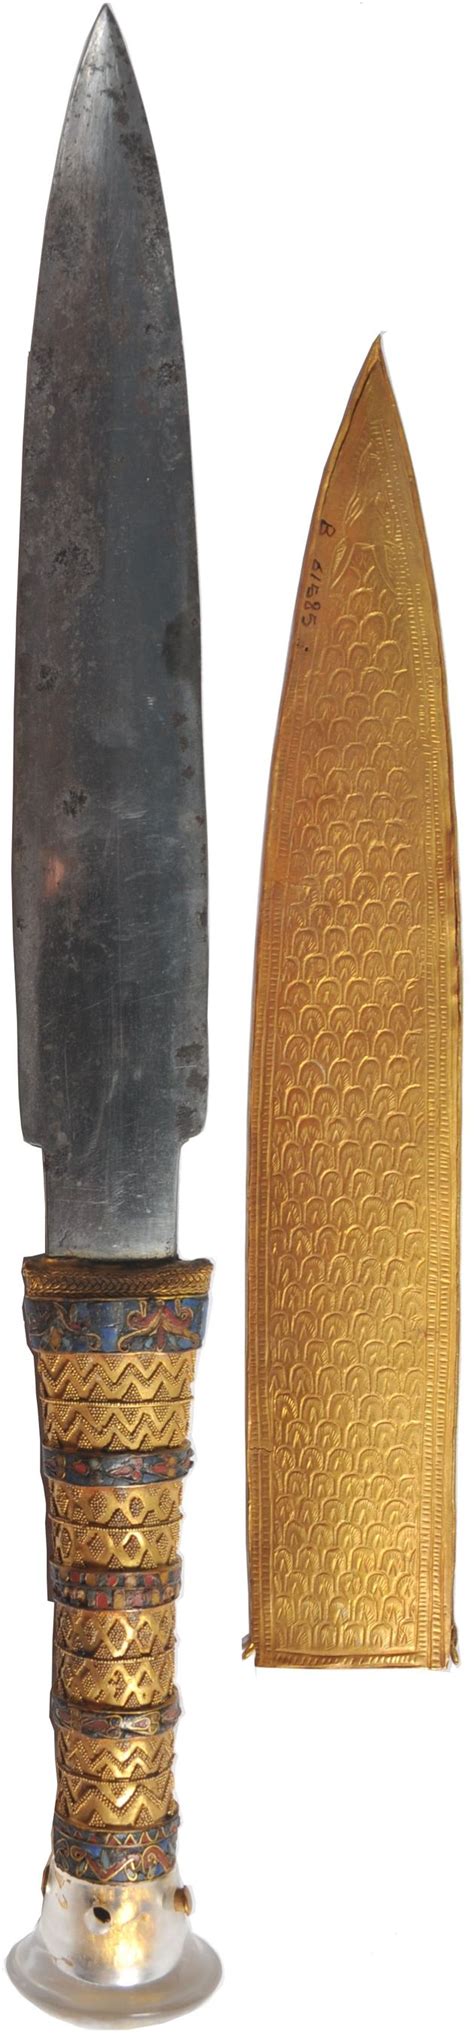 King Tuts Knife Was Made From A Meteorite The Huffington Post